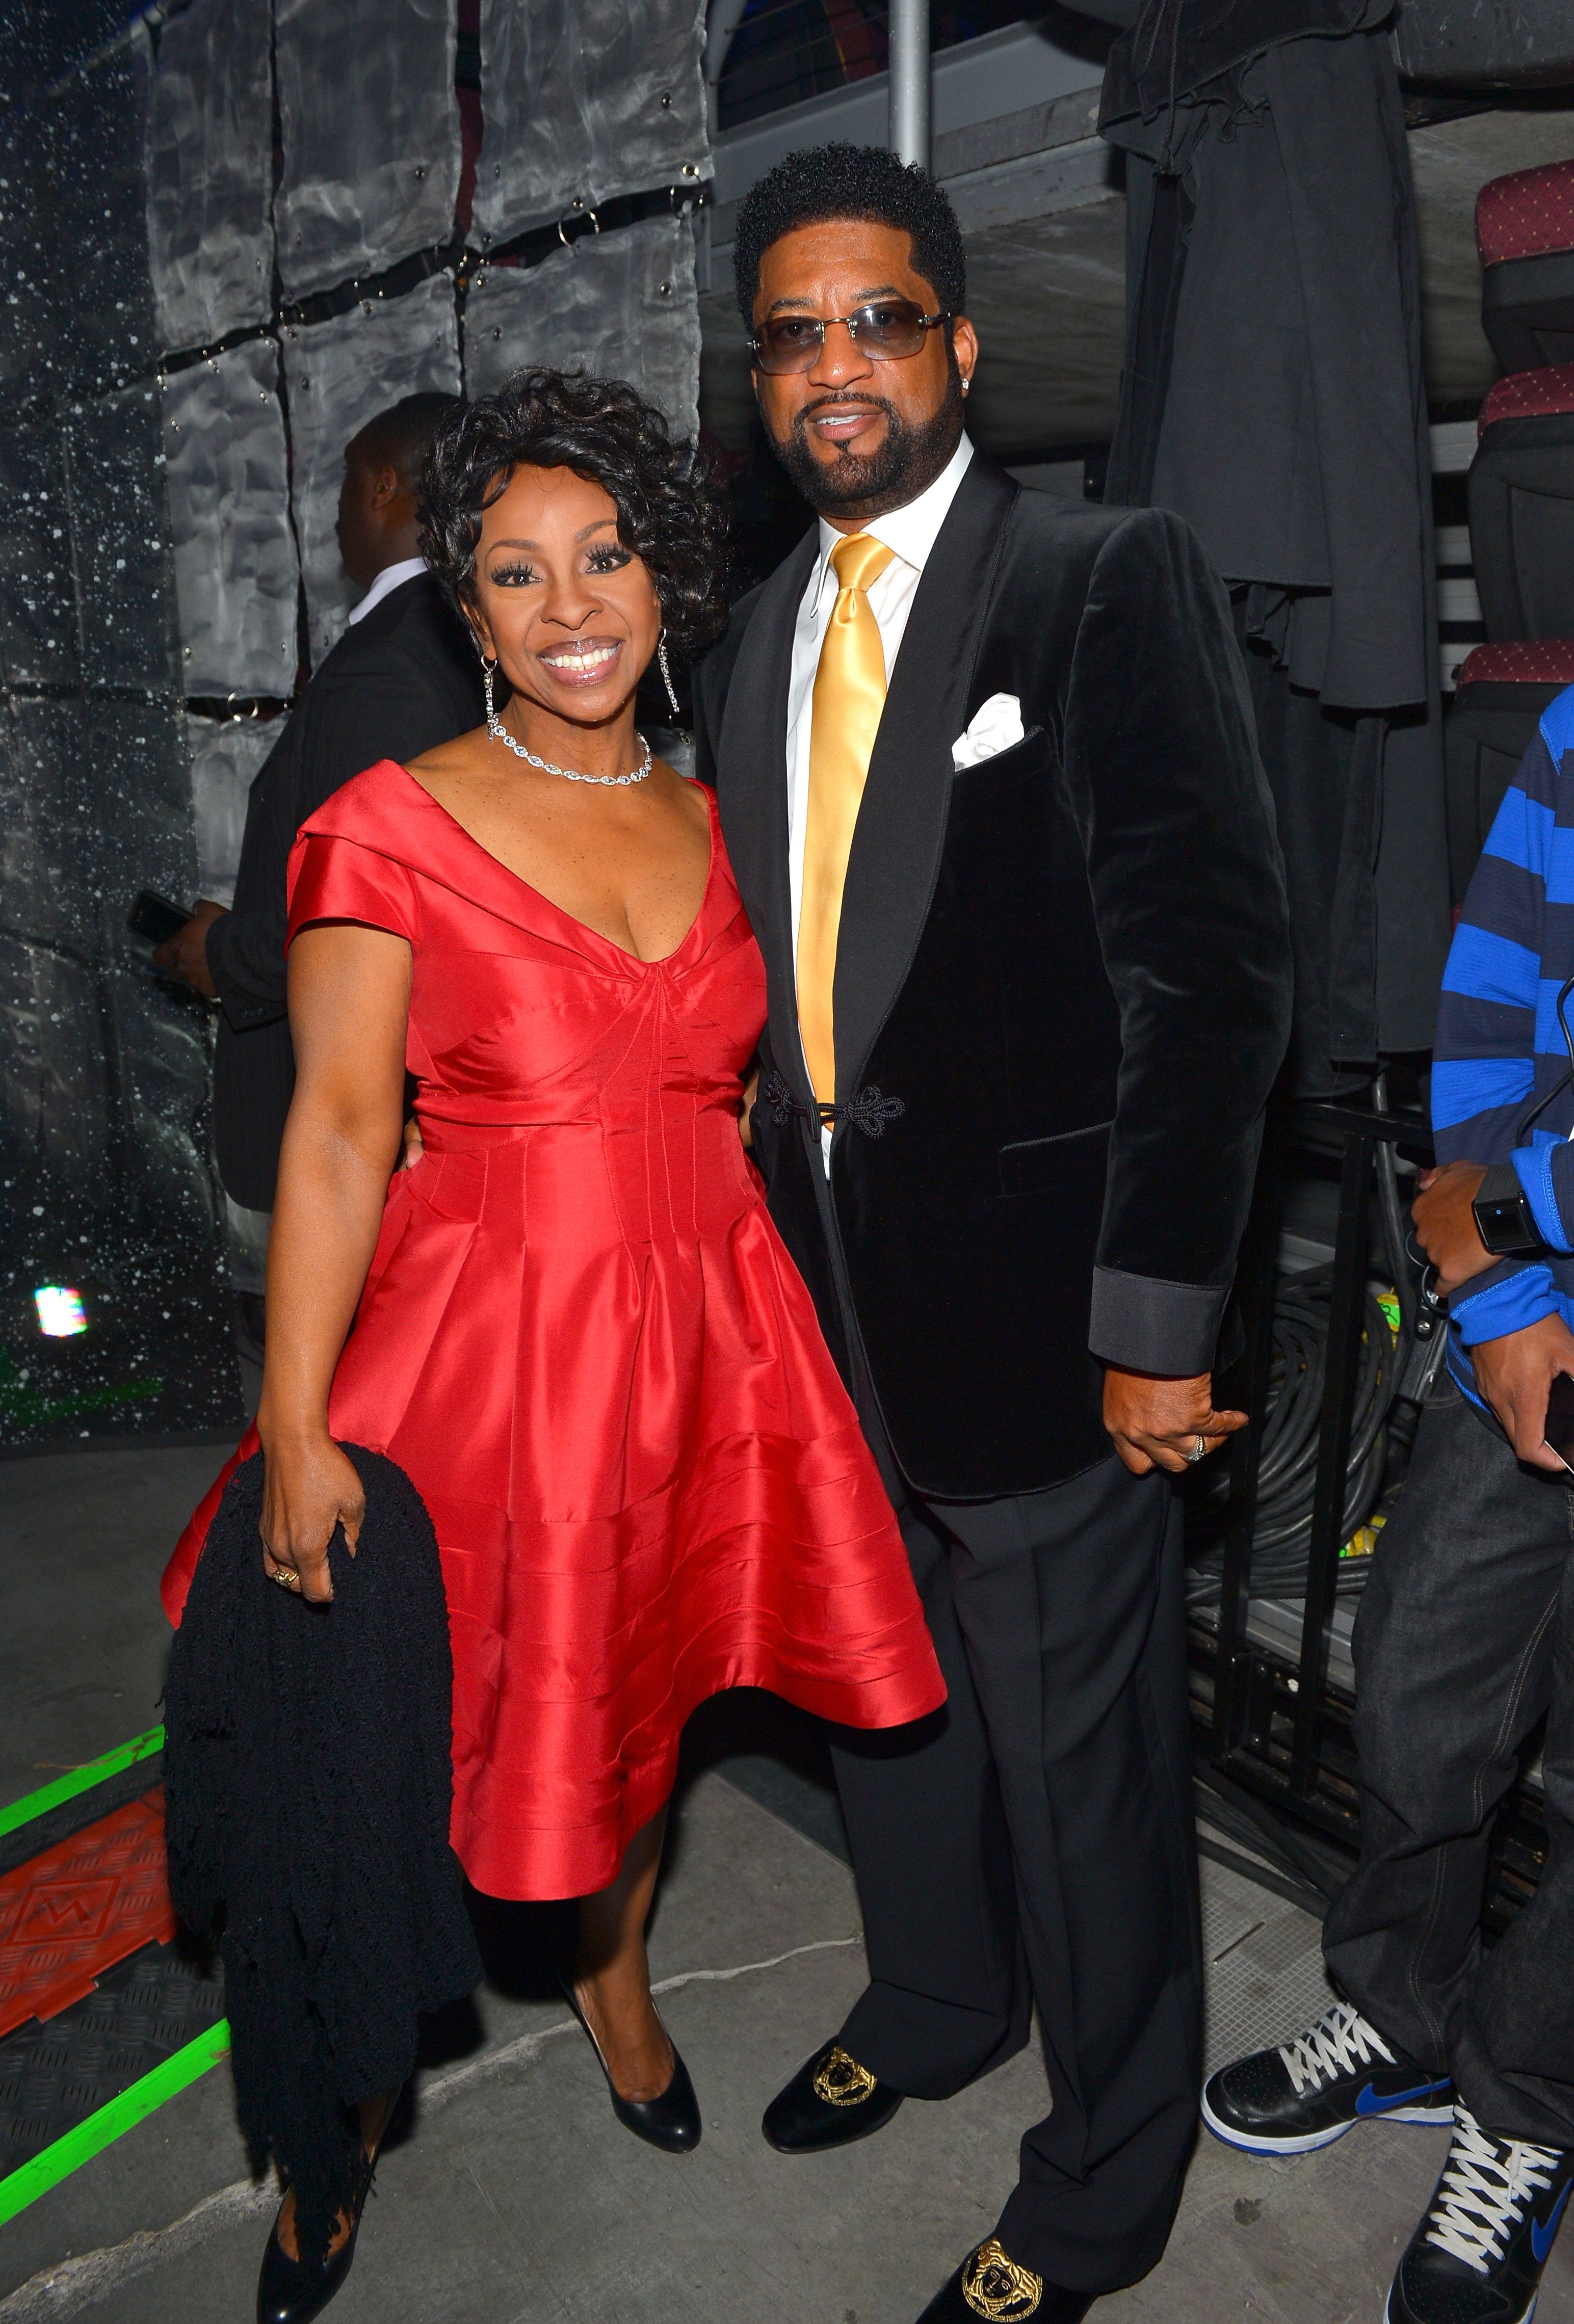 Gladys Knight and William McDowell at the Soul Train Awards 2013 in Las Vegas, Nevada | Source: Getty Images